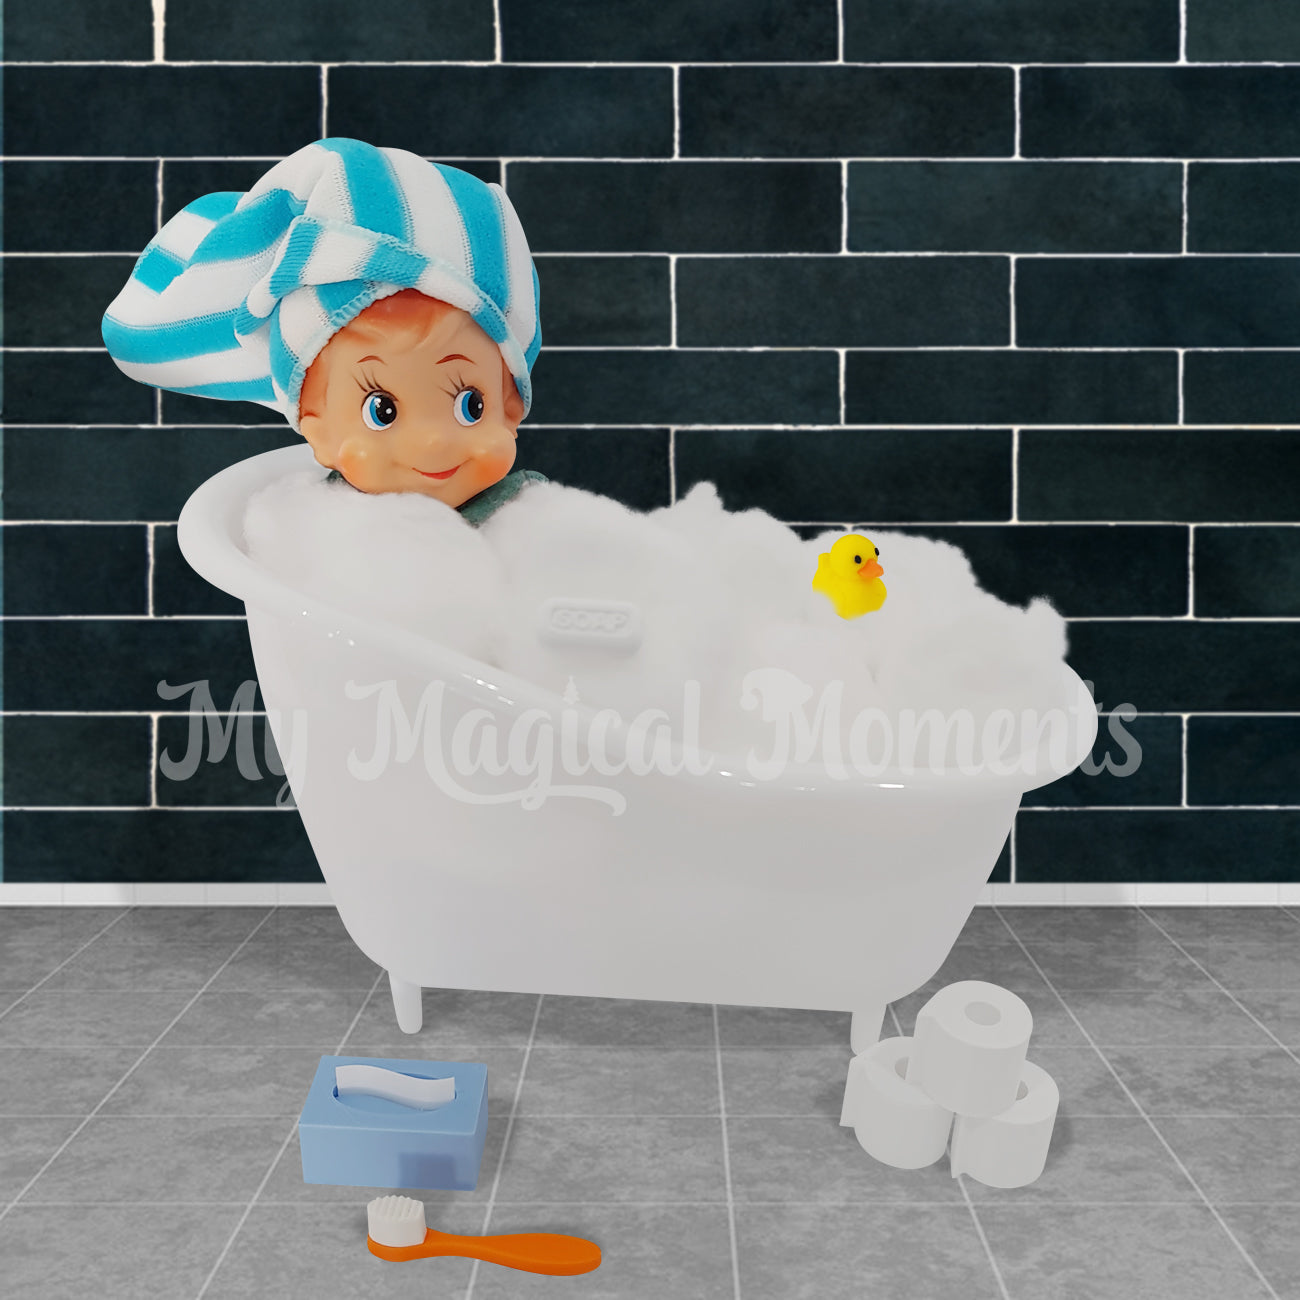 Bath tub scene for elf with rubber ducky